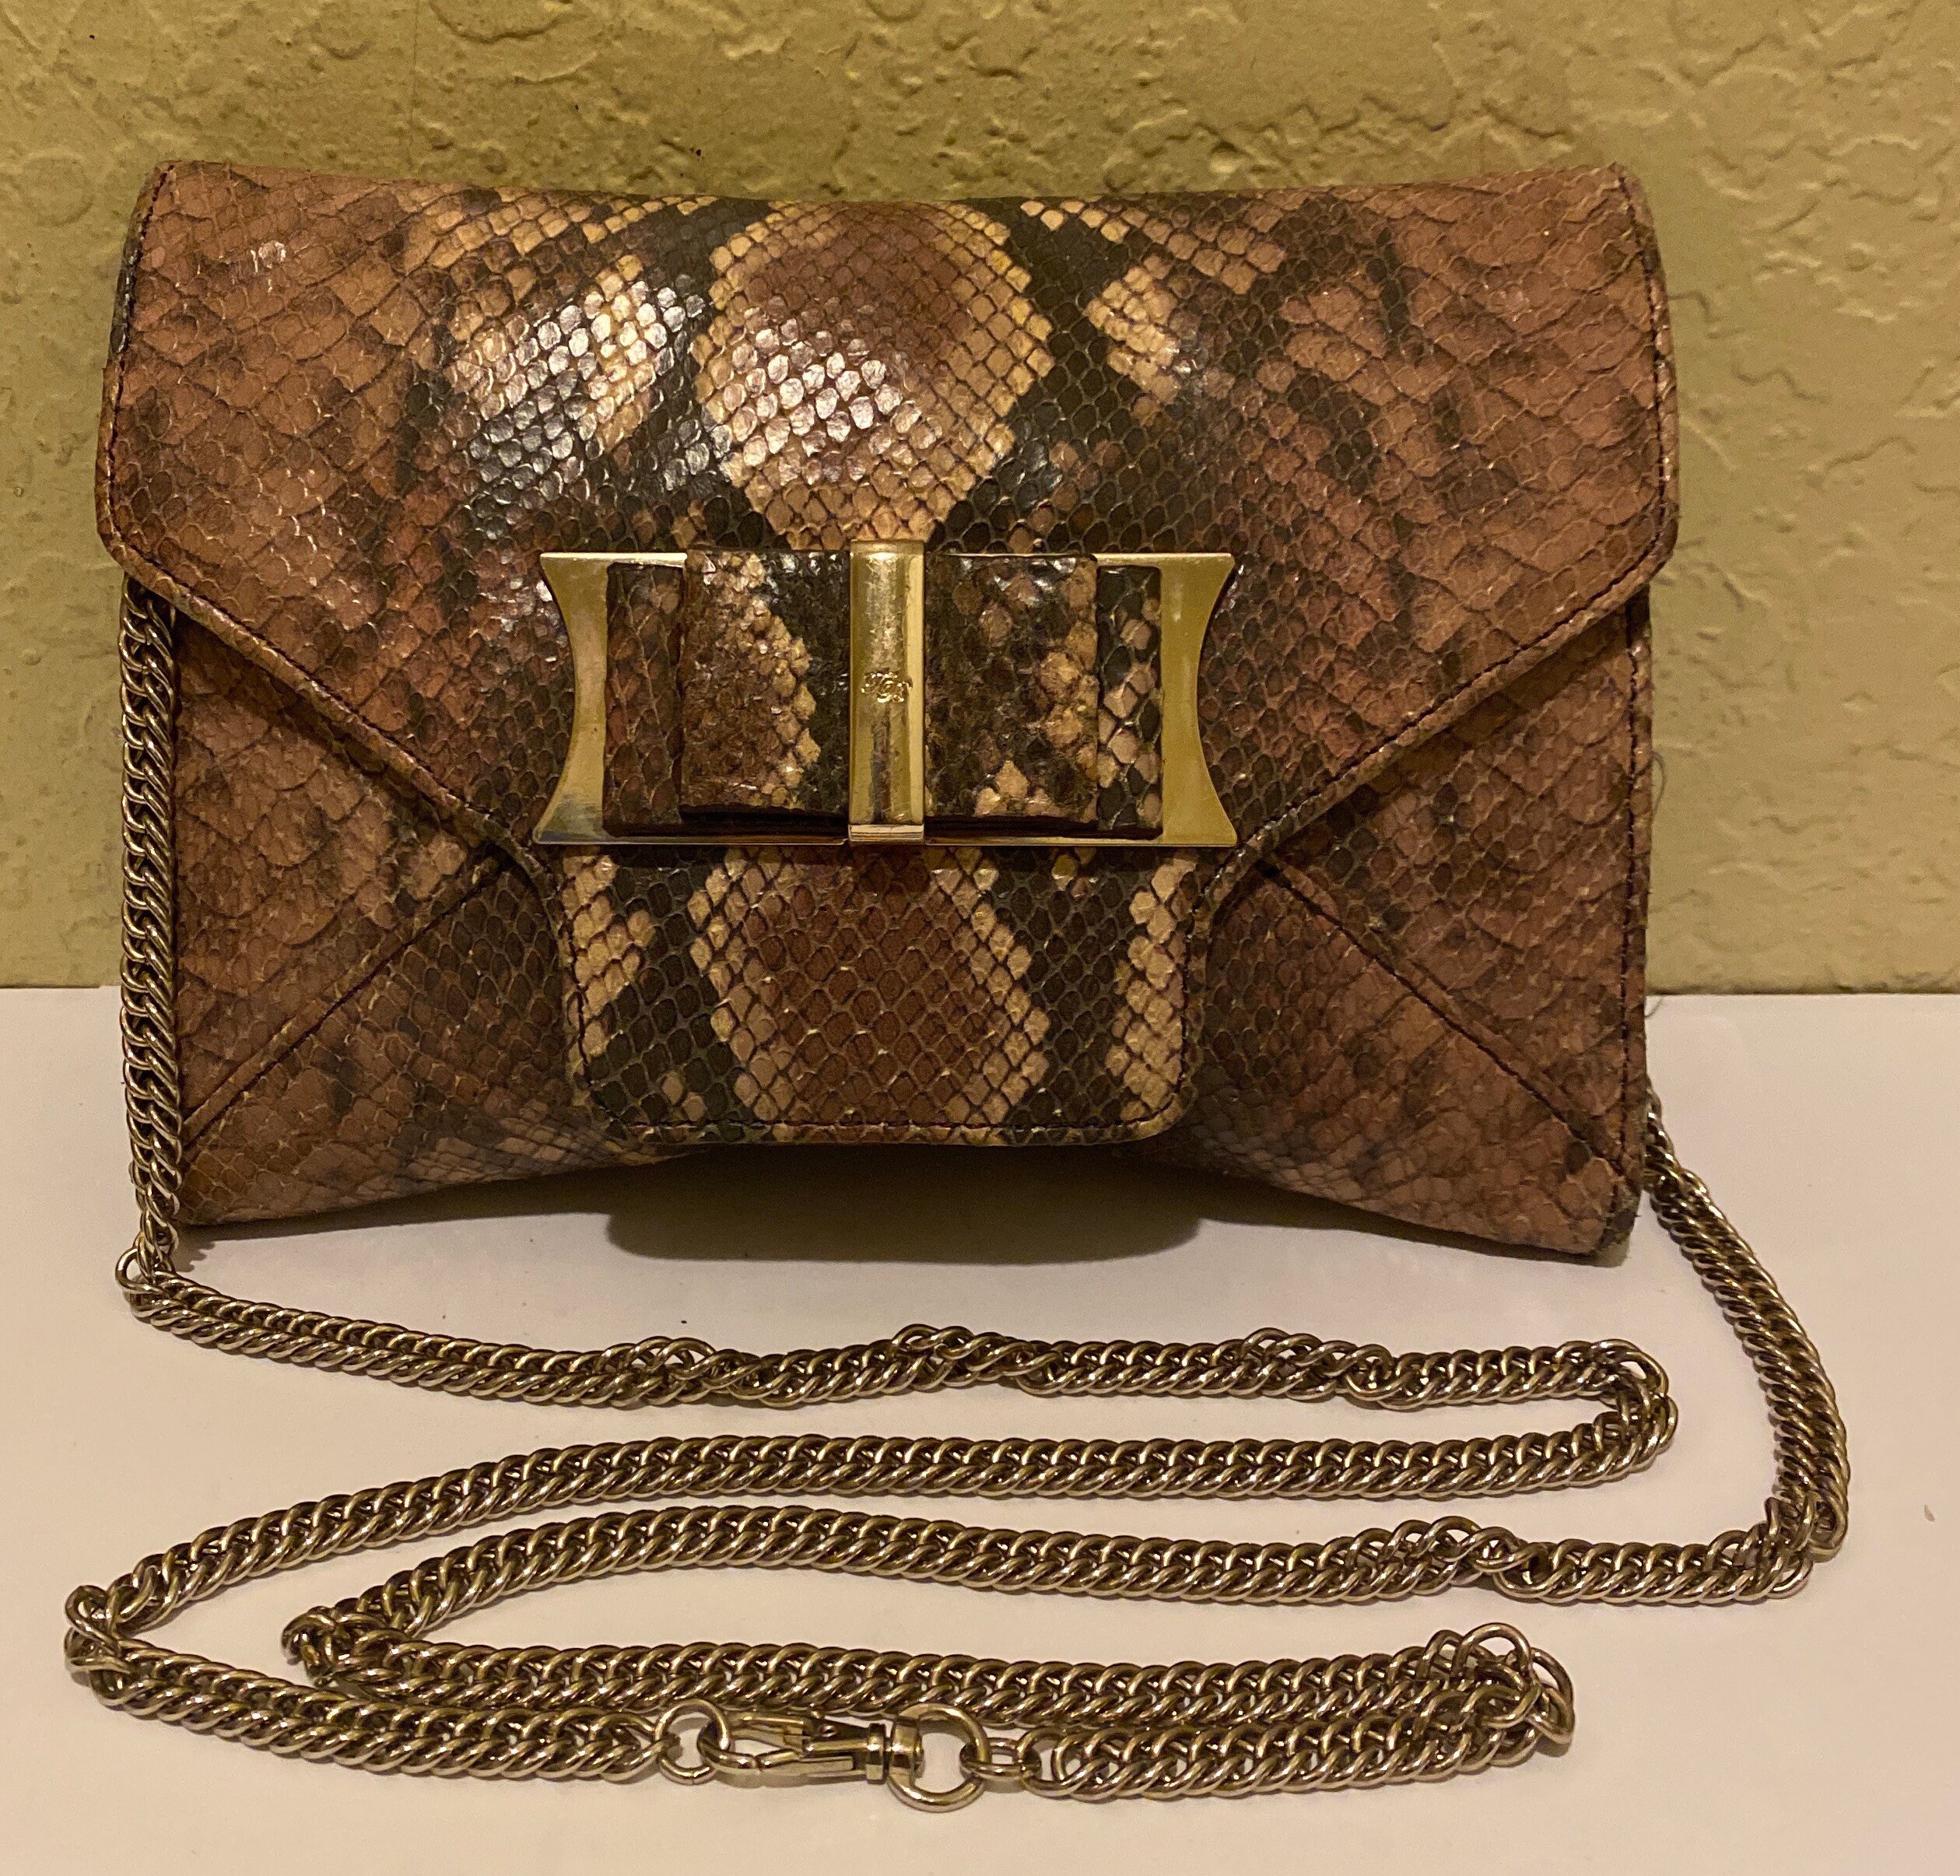 Ted Baker - Authenticated Handbag - Leather Gold for Women, Never Worn